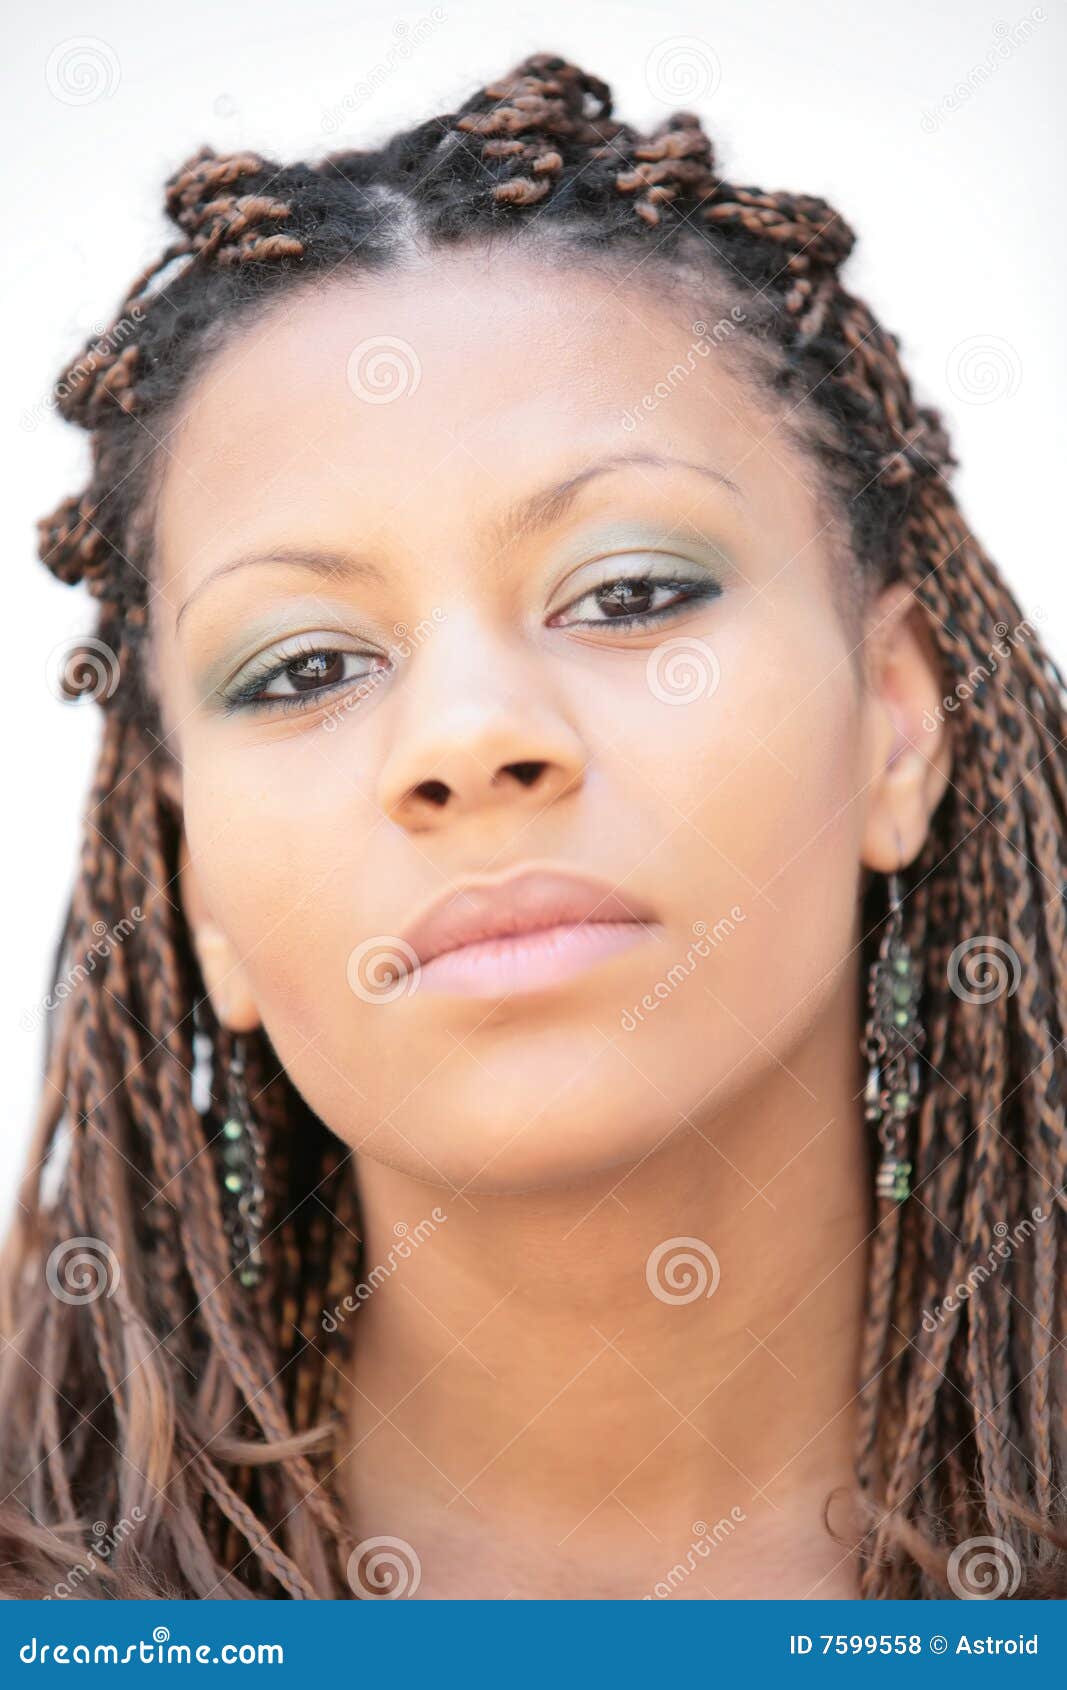 Girl With Exotic Hairstyle Royalty Free Stock Photos - Image: 7599558